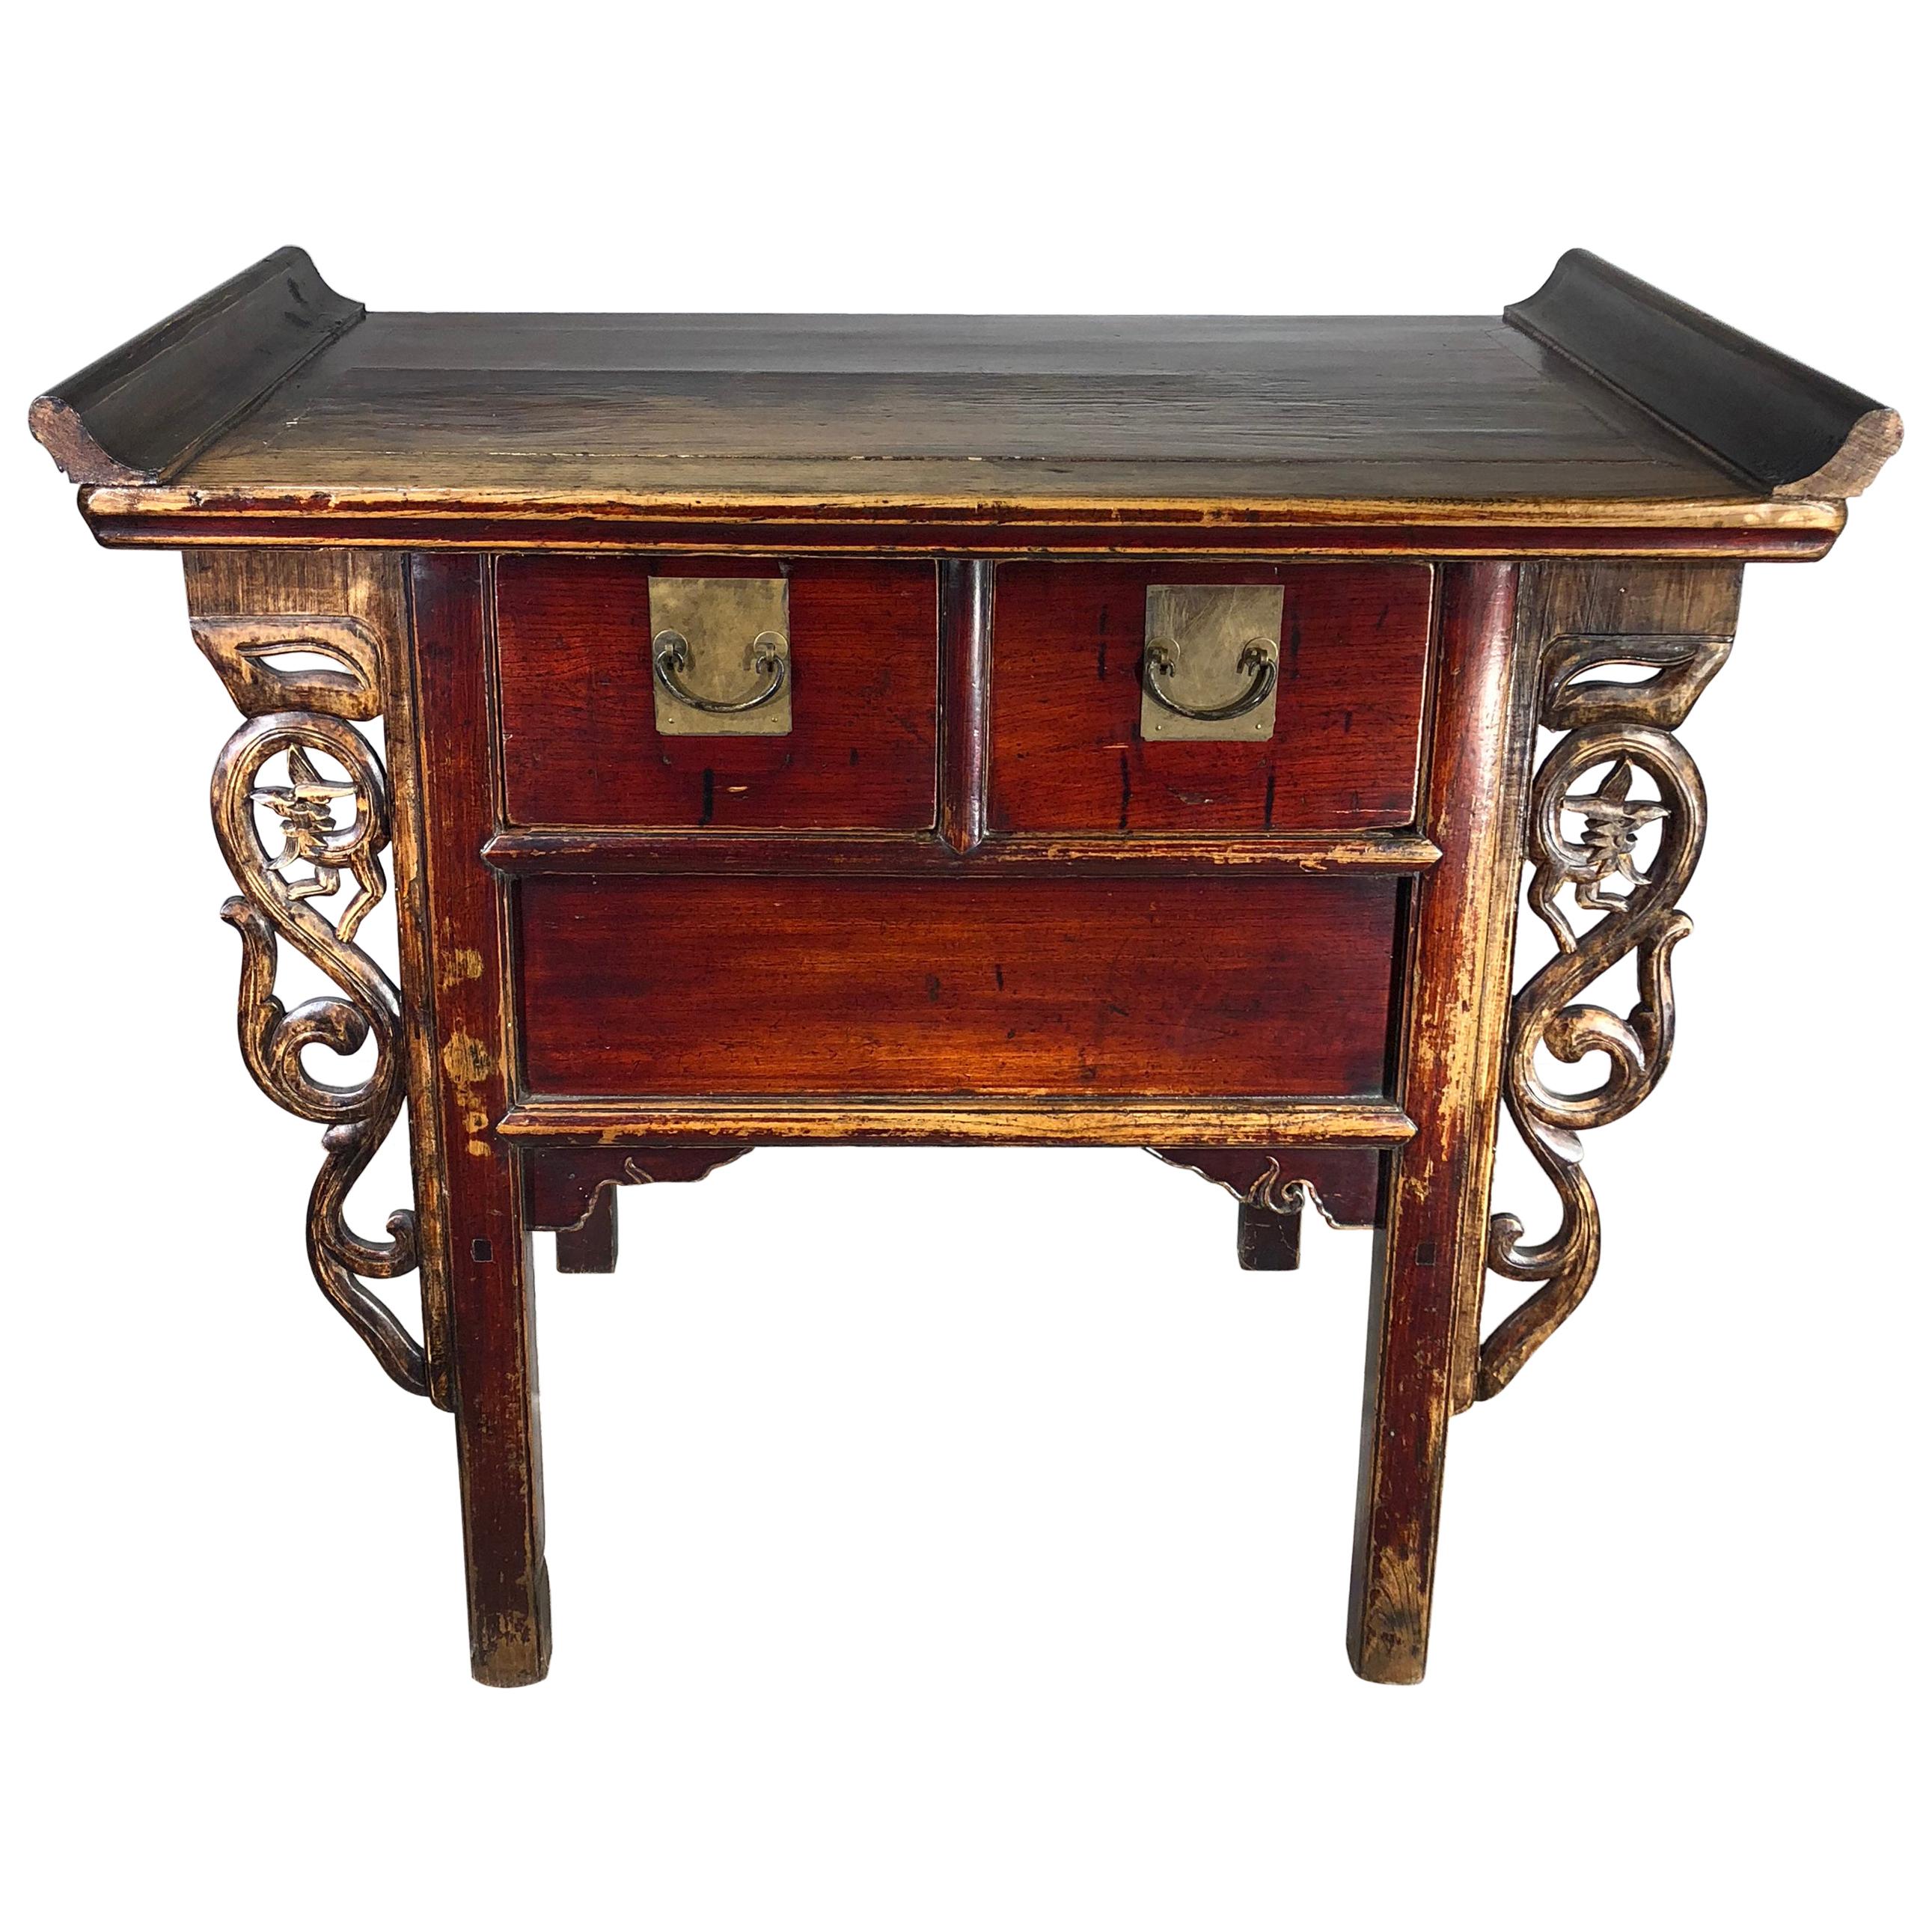 Chinese Altar Table, 19th Century